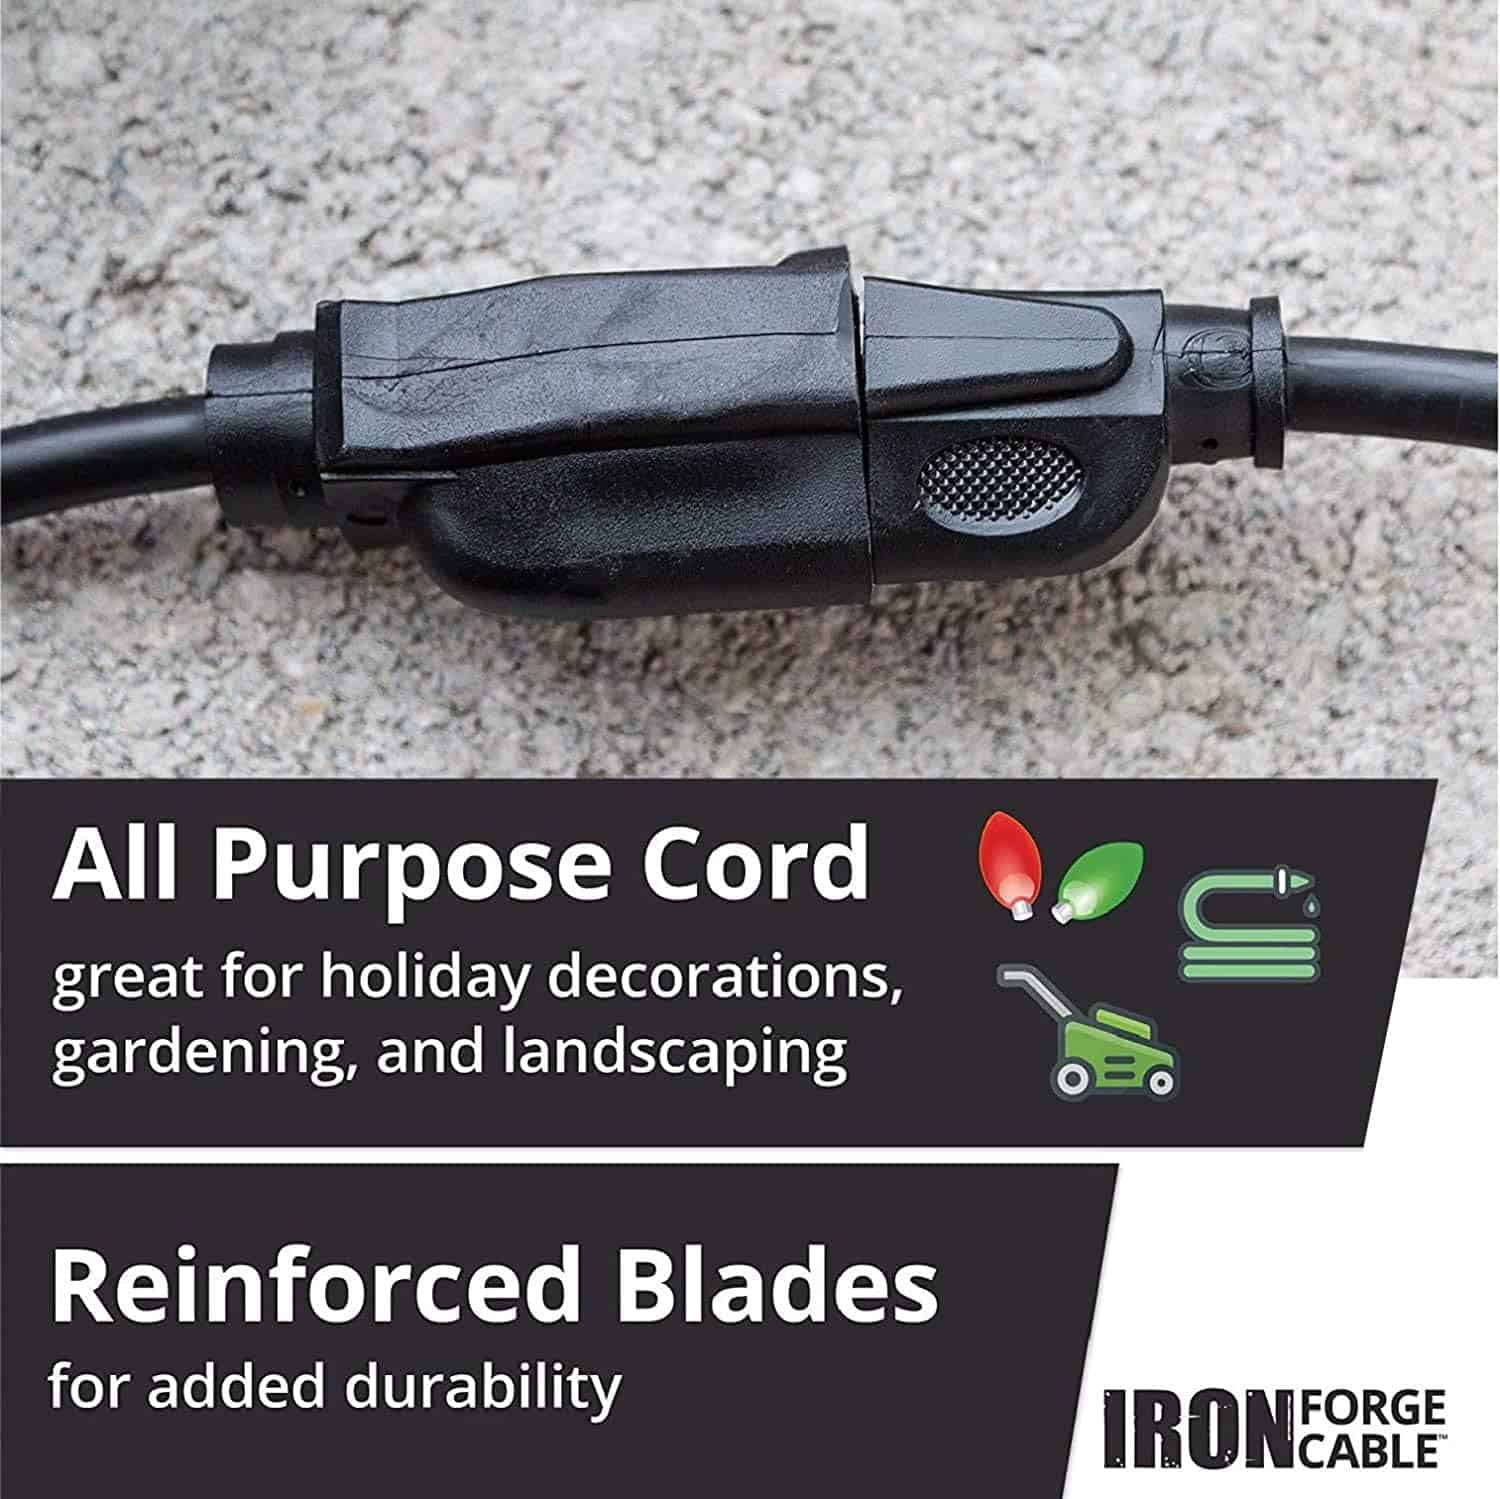 Iron Forge Cable 75 Ft Outdoor Extension Cord 16 3 Black 75 Foot Extension Cord Indoor Outdoor Use 3 Prong Weatherproof Exterior Extension Cord Gr 3